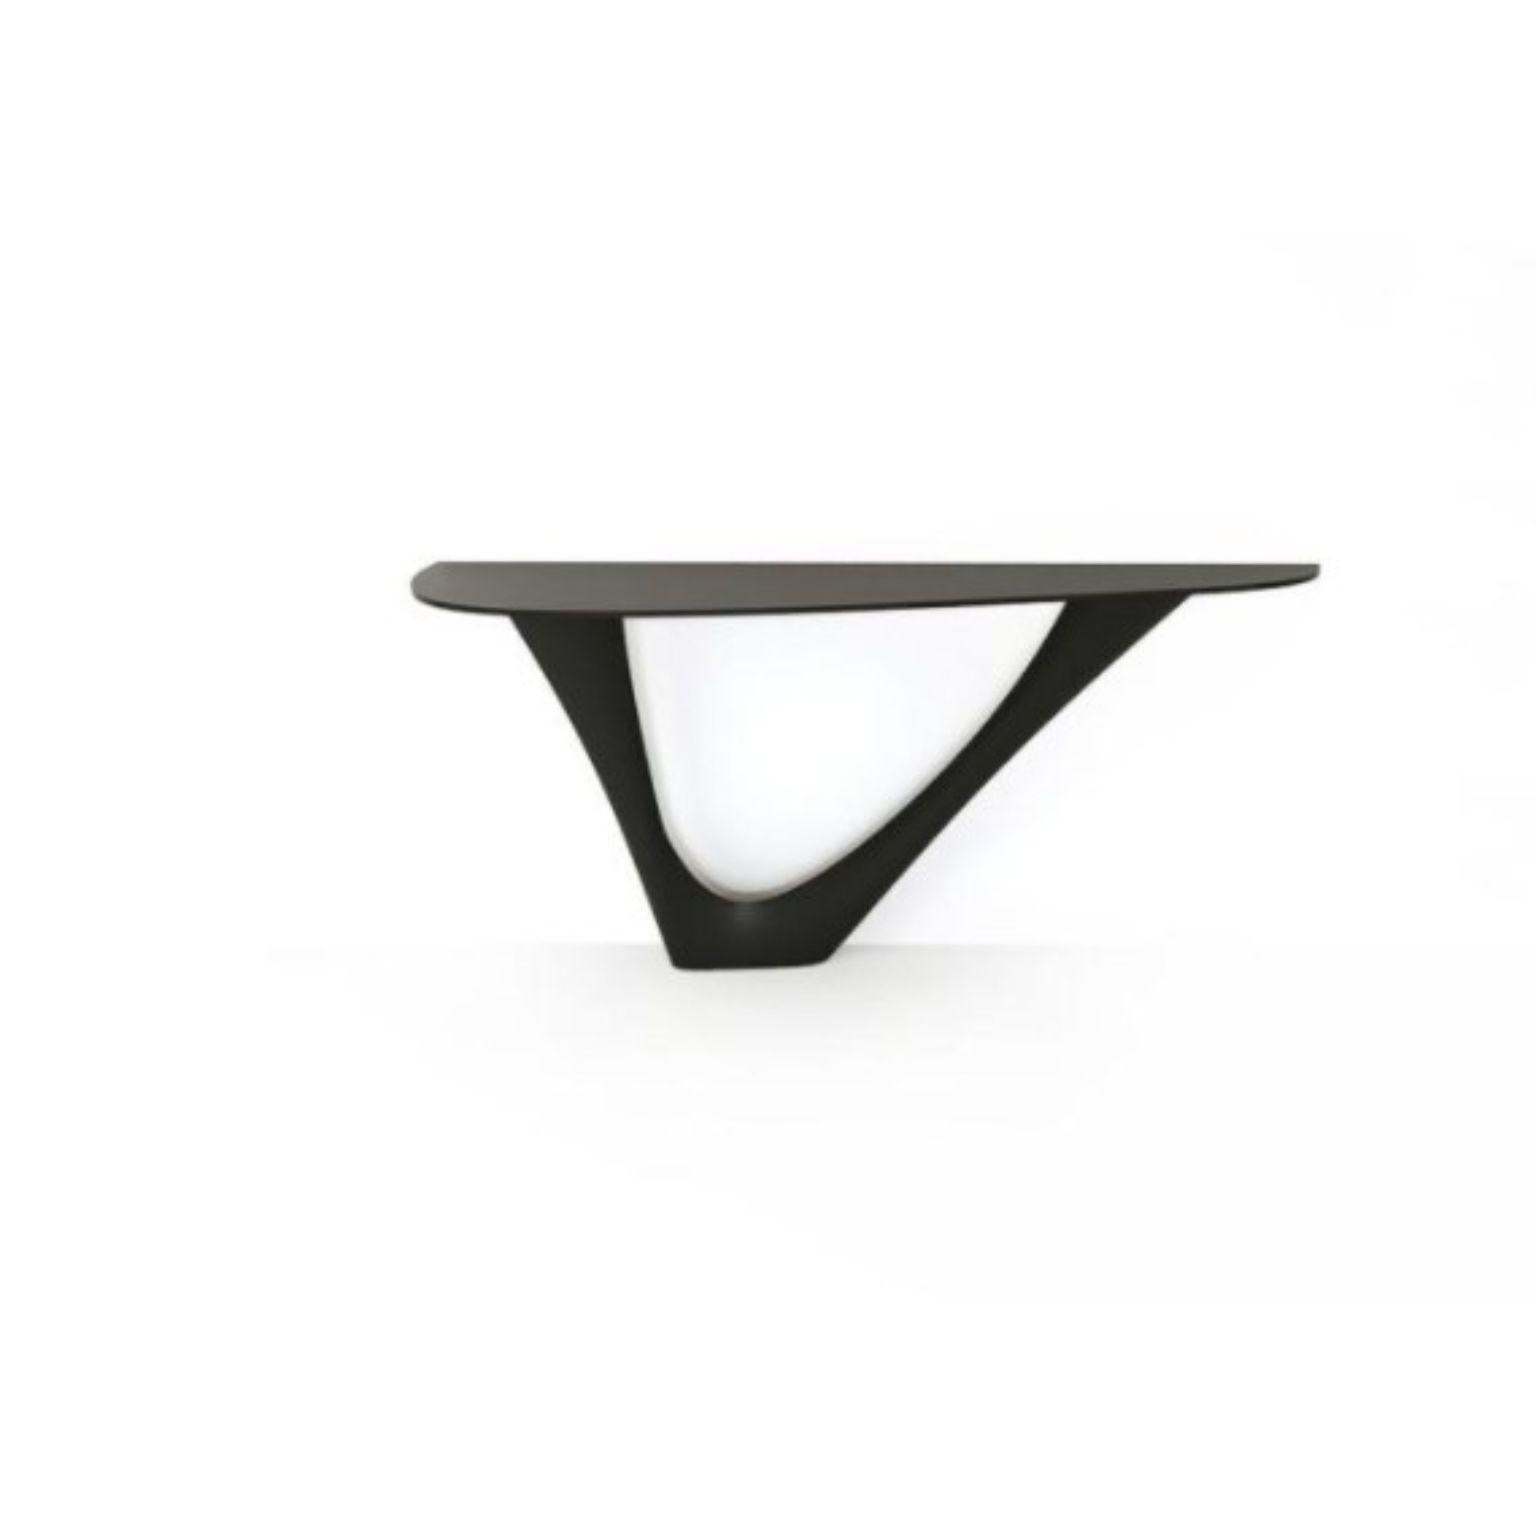 Graphite G-Console steel base with steel top Mono by Zieta
Dimensions: D 43 x W 159 x H 75 cm 
Material: Carbon steel.
Also available in different colors and dimensions.

G-Console is another bionic object in our collection. Created for smaller